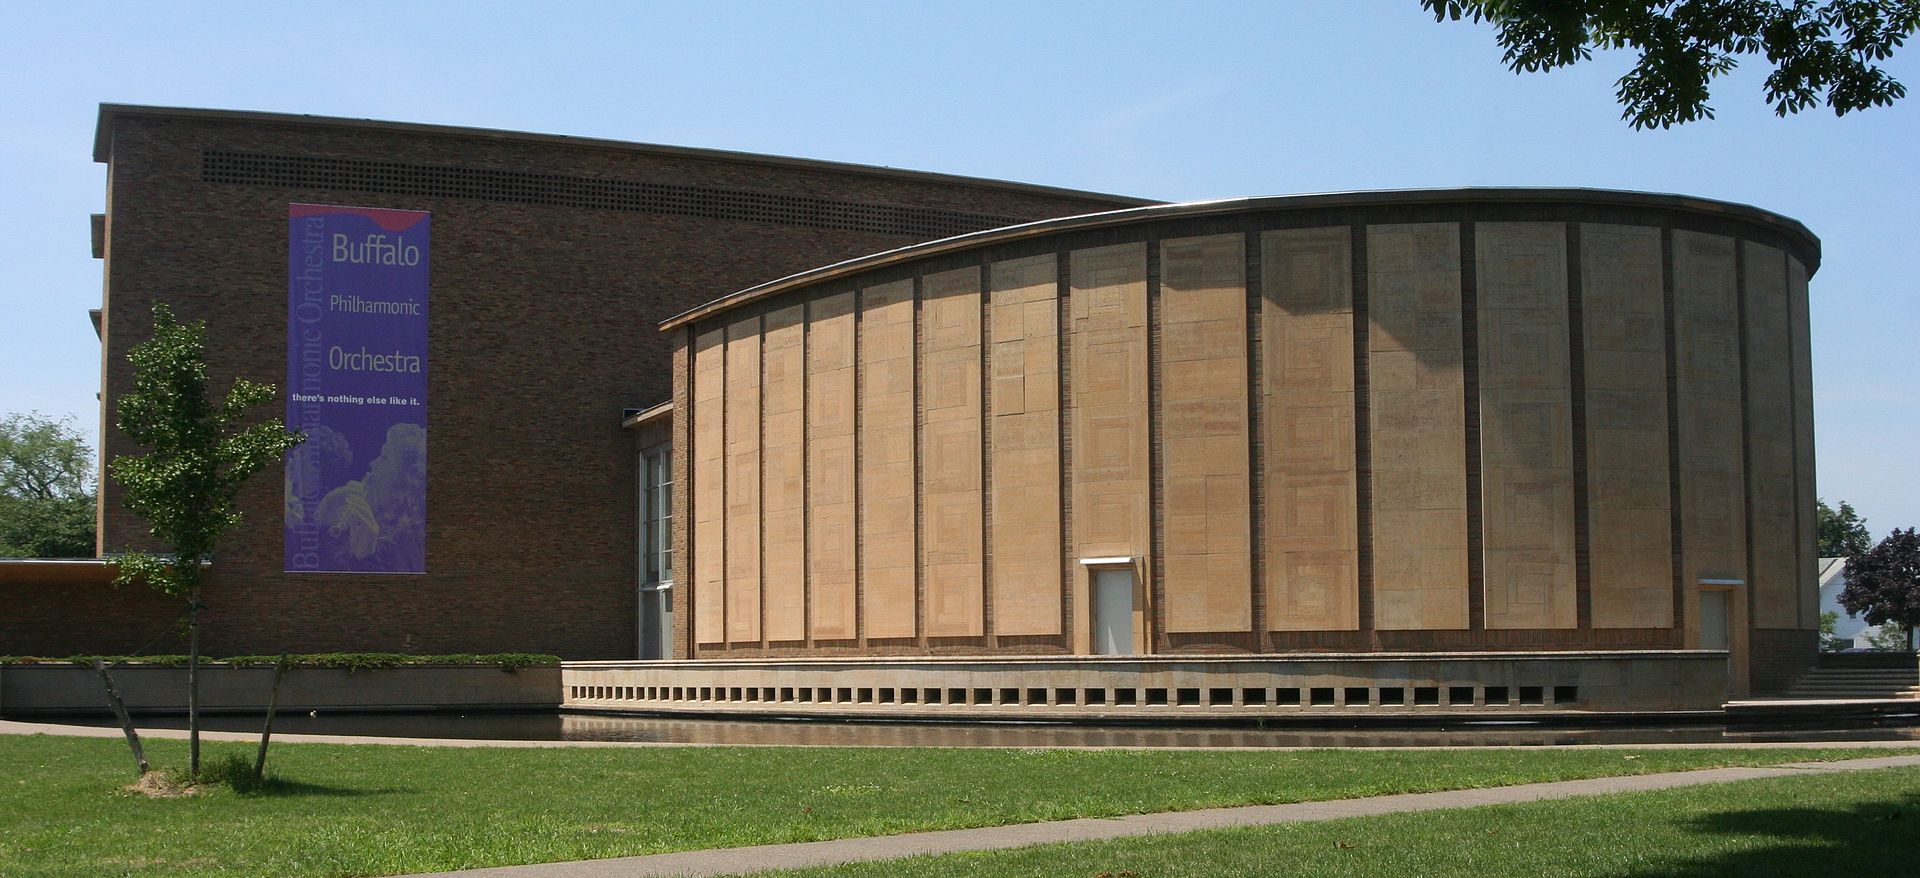 Kleinhans Music Hall, home of the Buffalo Philharmonic Orchestra, was designed by Eero Saarinen with his father, Eliel Saarinen in the International Style.